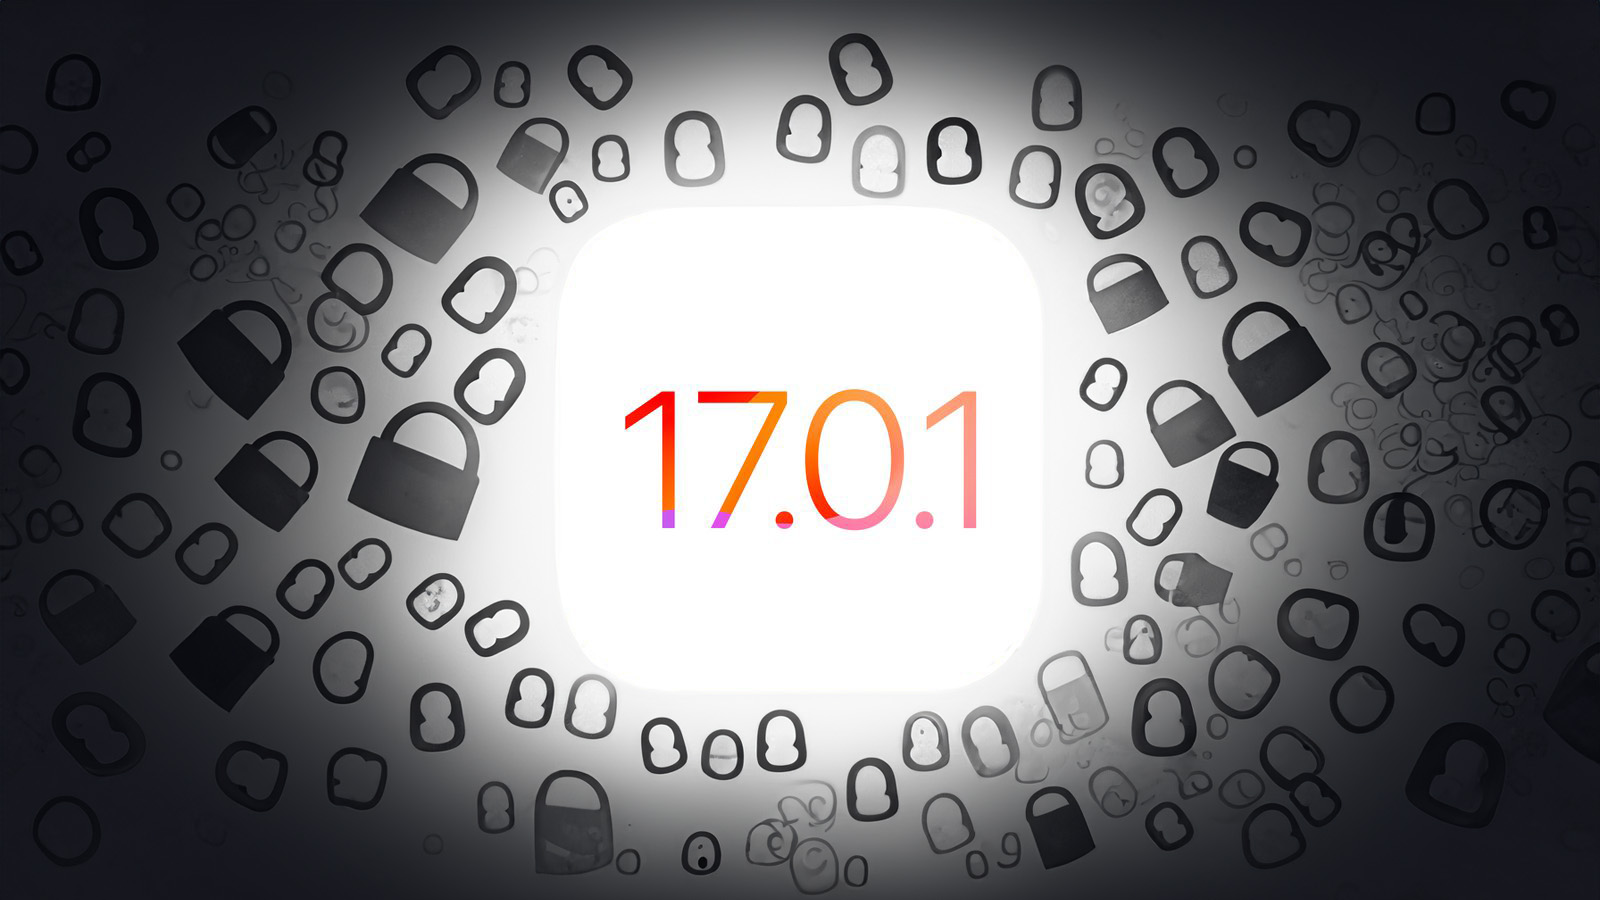 From iPhoneIslam.com, an image of the lock screen showing the date 17 07 01.